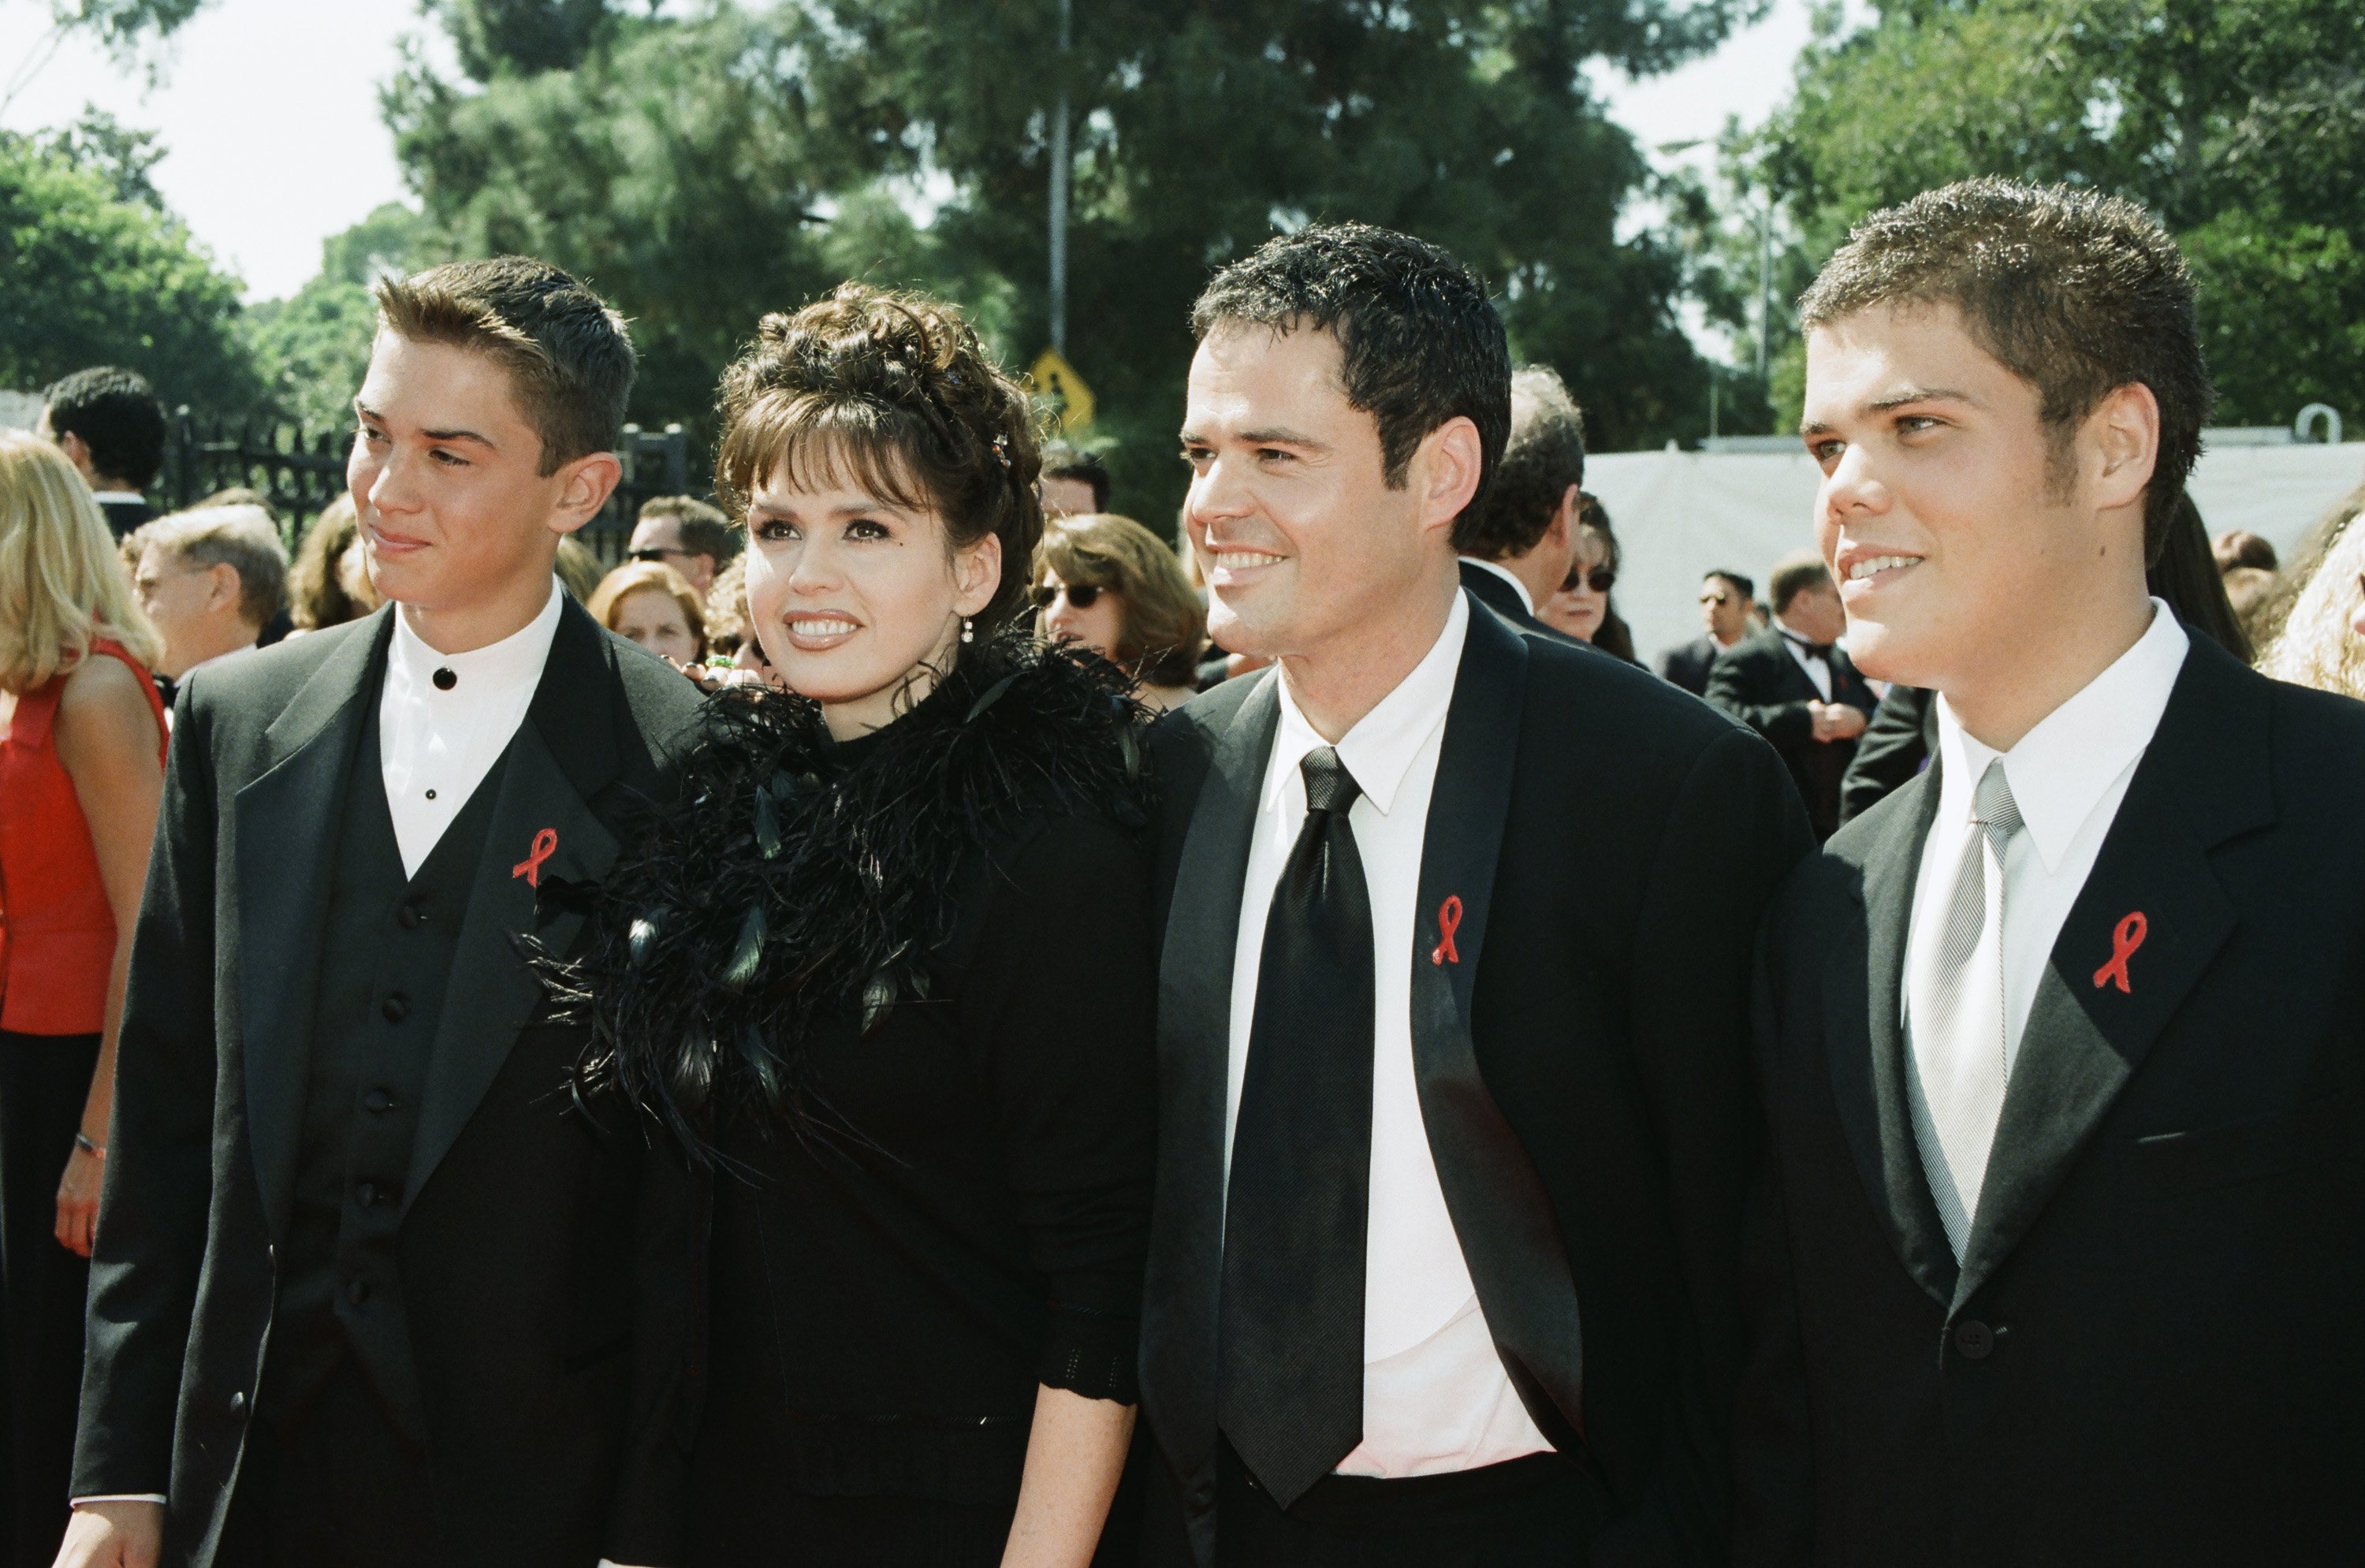 Michael Blosil, Marie, Donny, and Brandon Osmond at the 50th Annual Primetime Emmy Awards in Los Angeles, California, on September 13, 1998. | Source: Margaret C. Norton/NBCU Photo Bank/NBCUniversal/Getty Images